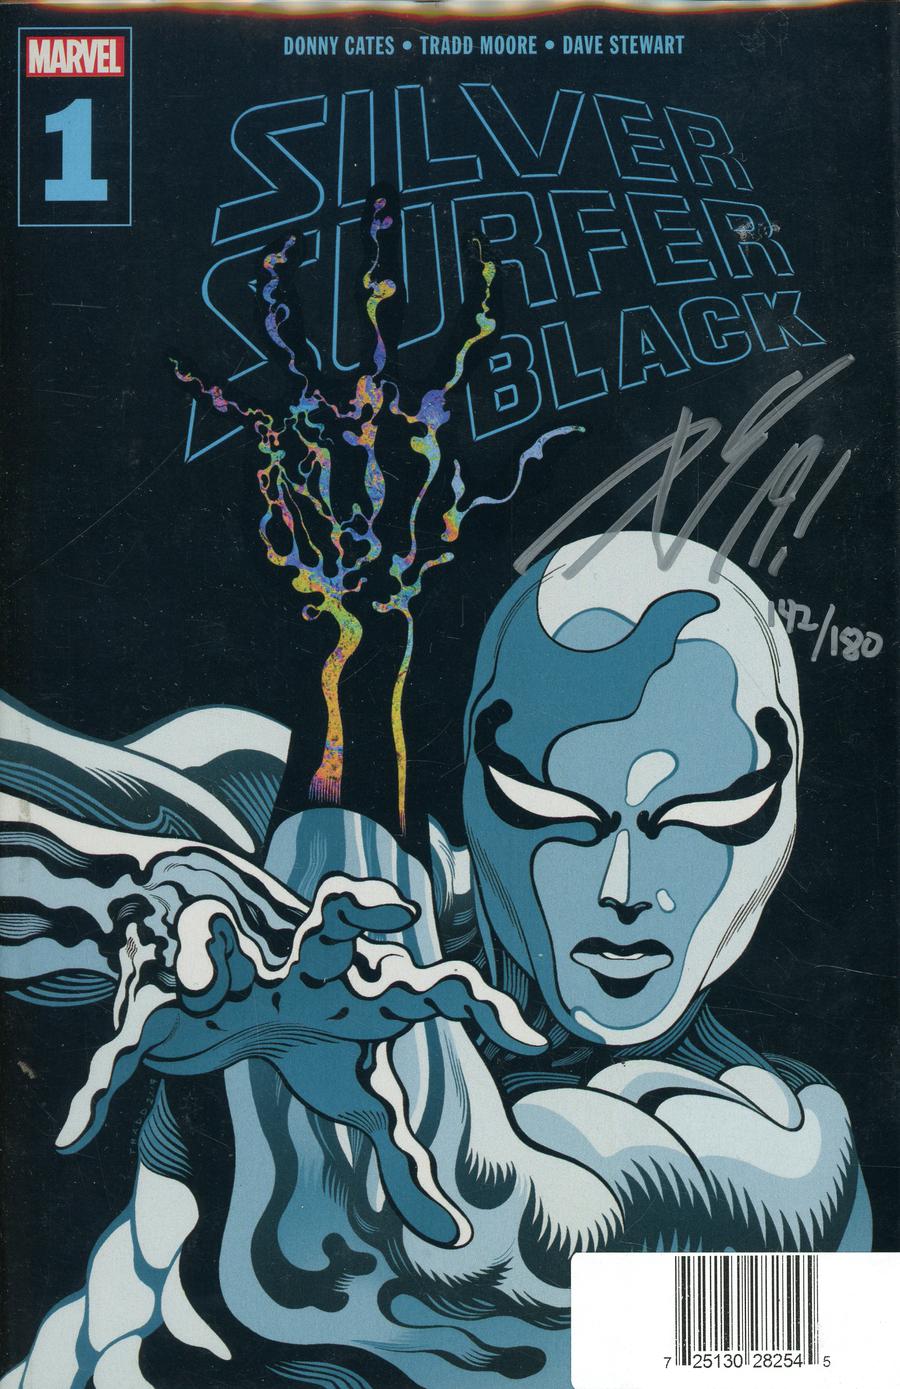 Silver Surfer Black #1 DF Signed By Donny Cates Plus 1